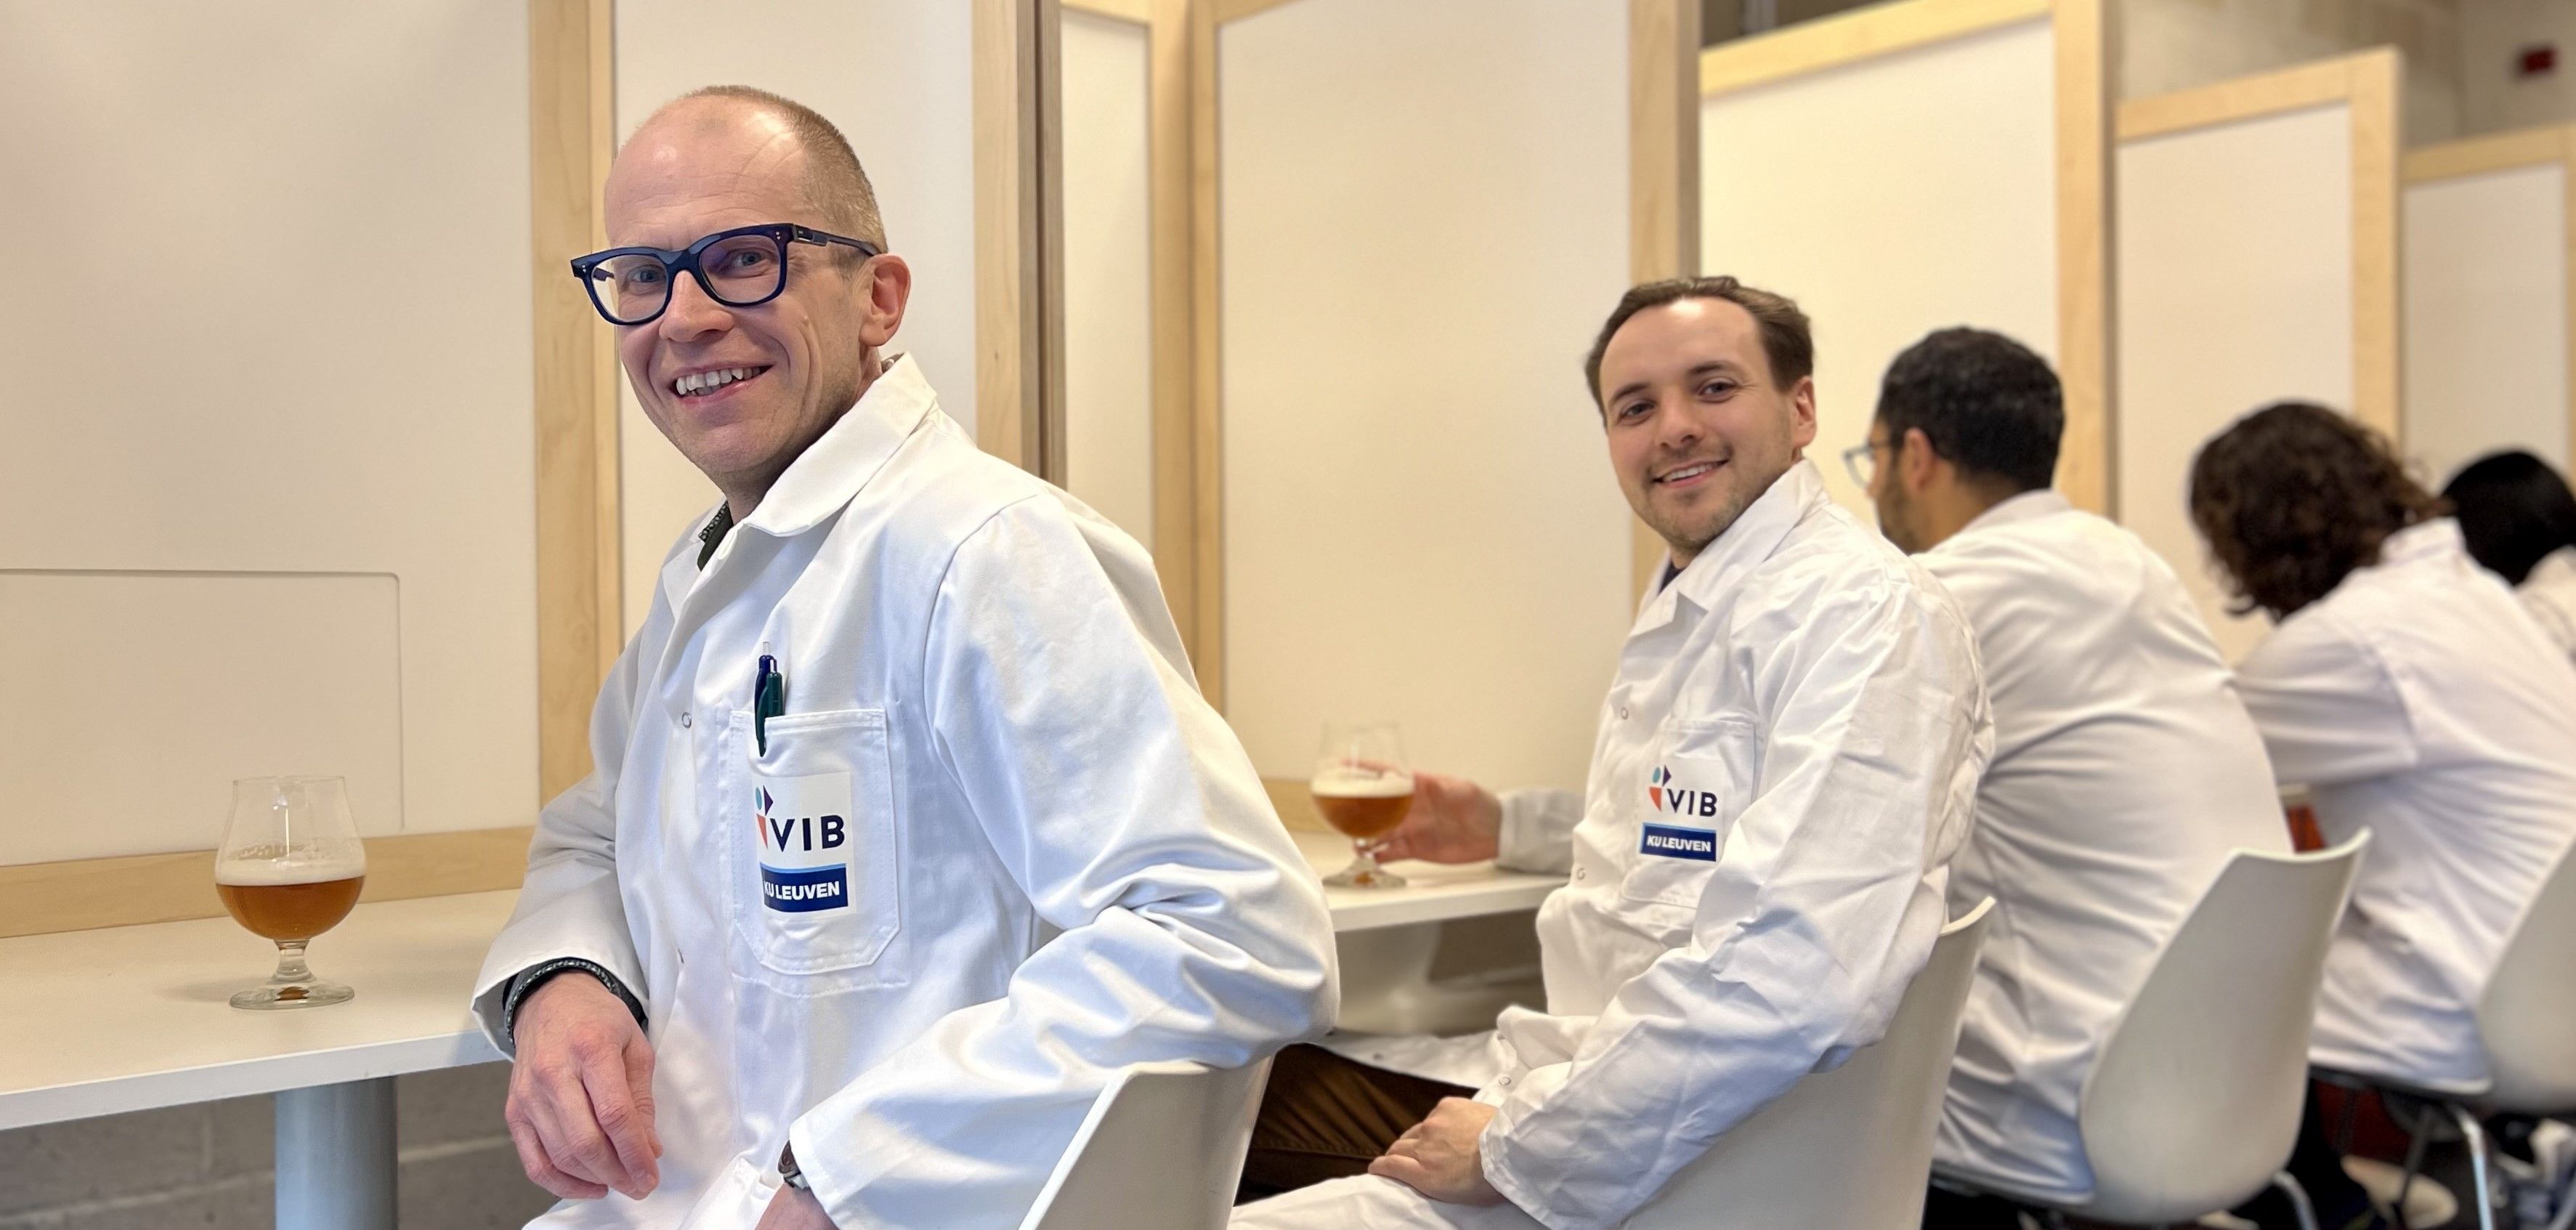 Kevin Verstrepen (Director of VIB- KU Leuven Center for Microbiology) and Michiel Schreurs (lead author of the study) during a taste session.